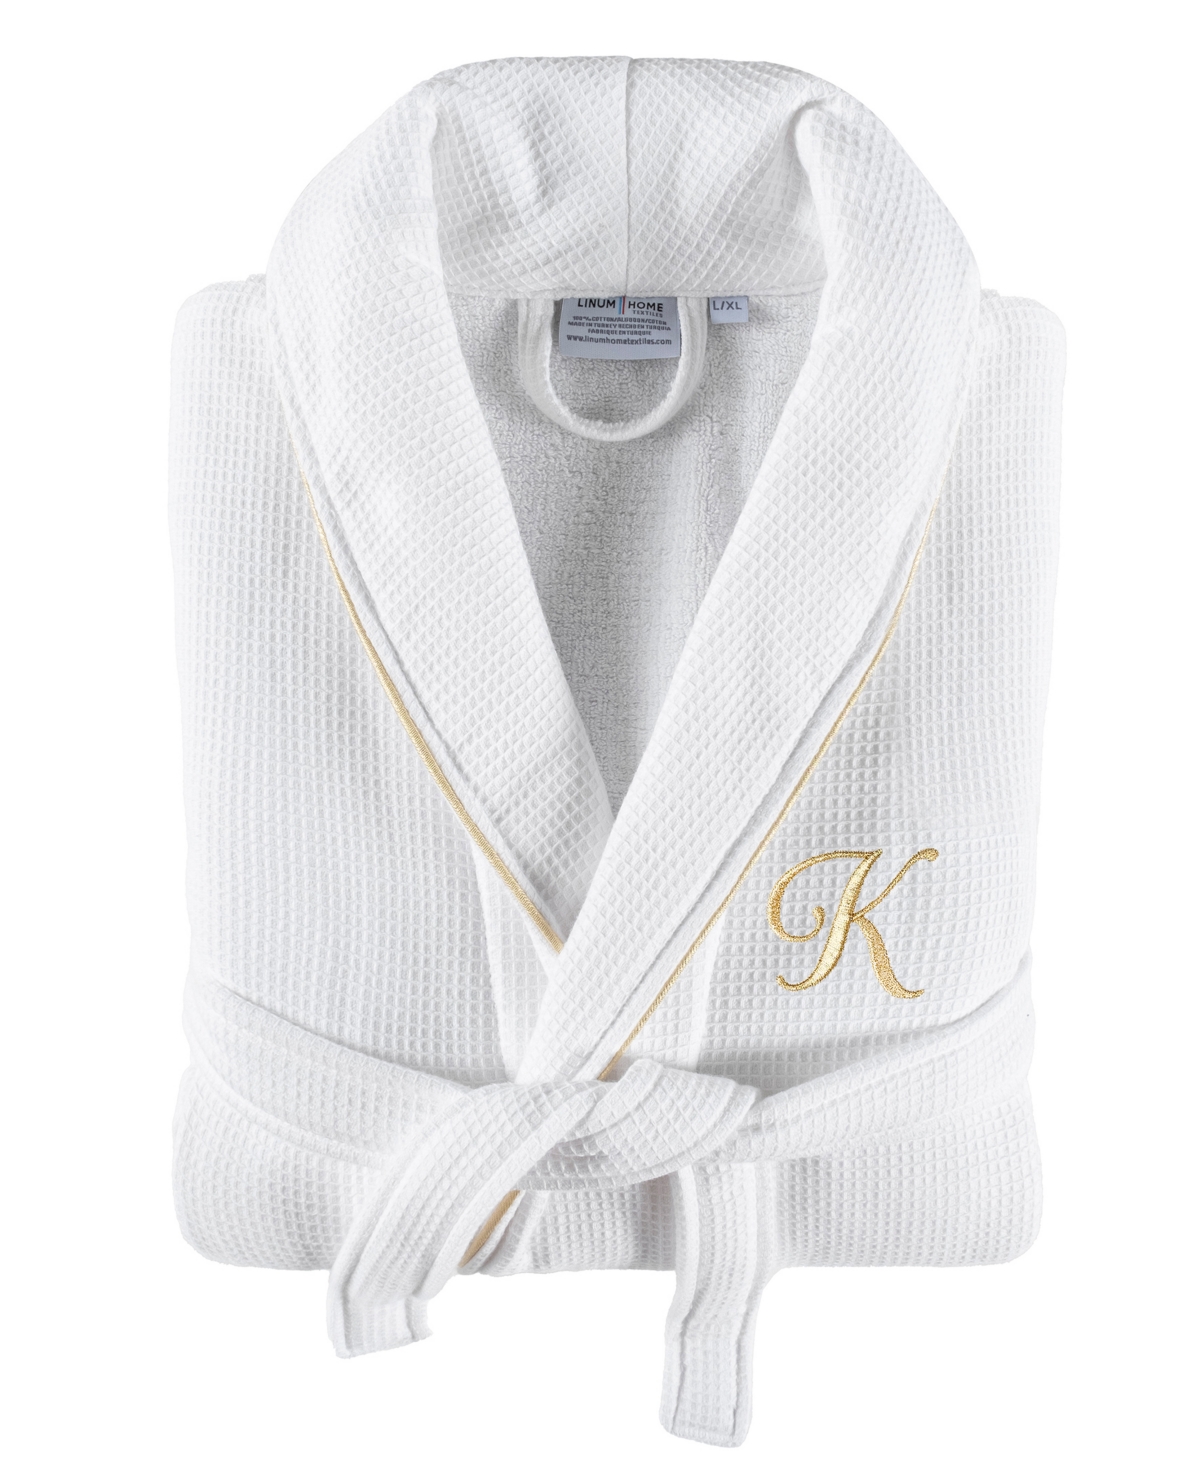 Linum Home Textiles 100% Turkish Cotton Unisex Personalized Waffle Weave Terry Bathrobe With Satin Piped Trim In White K